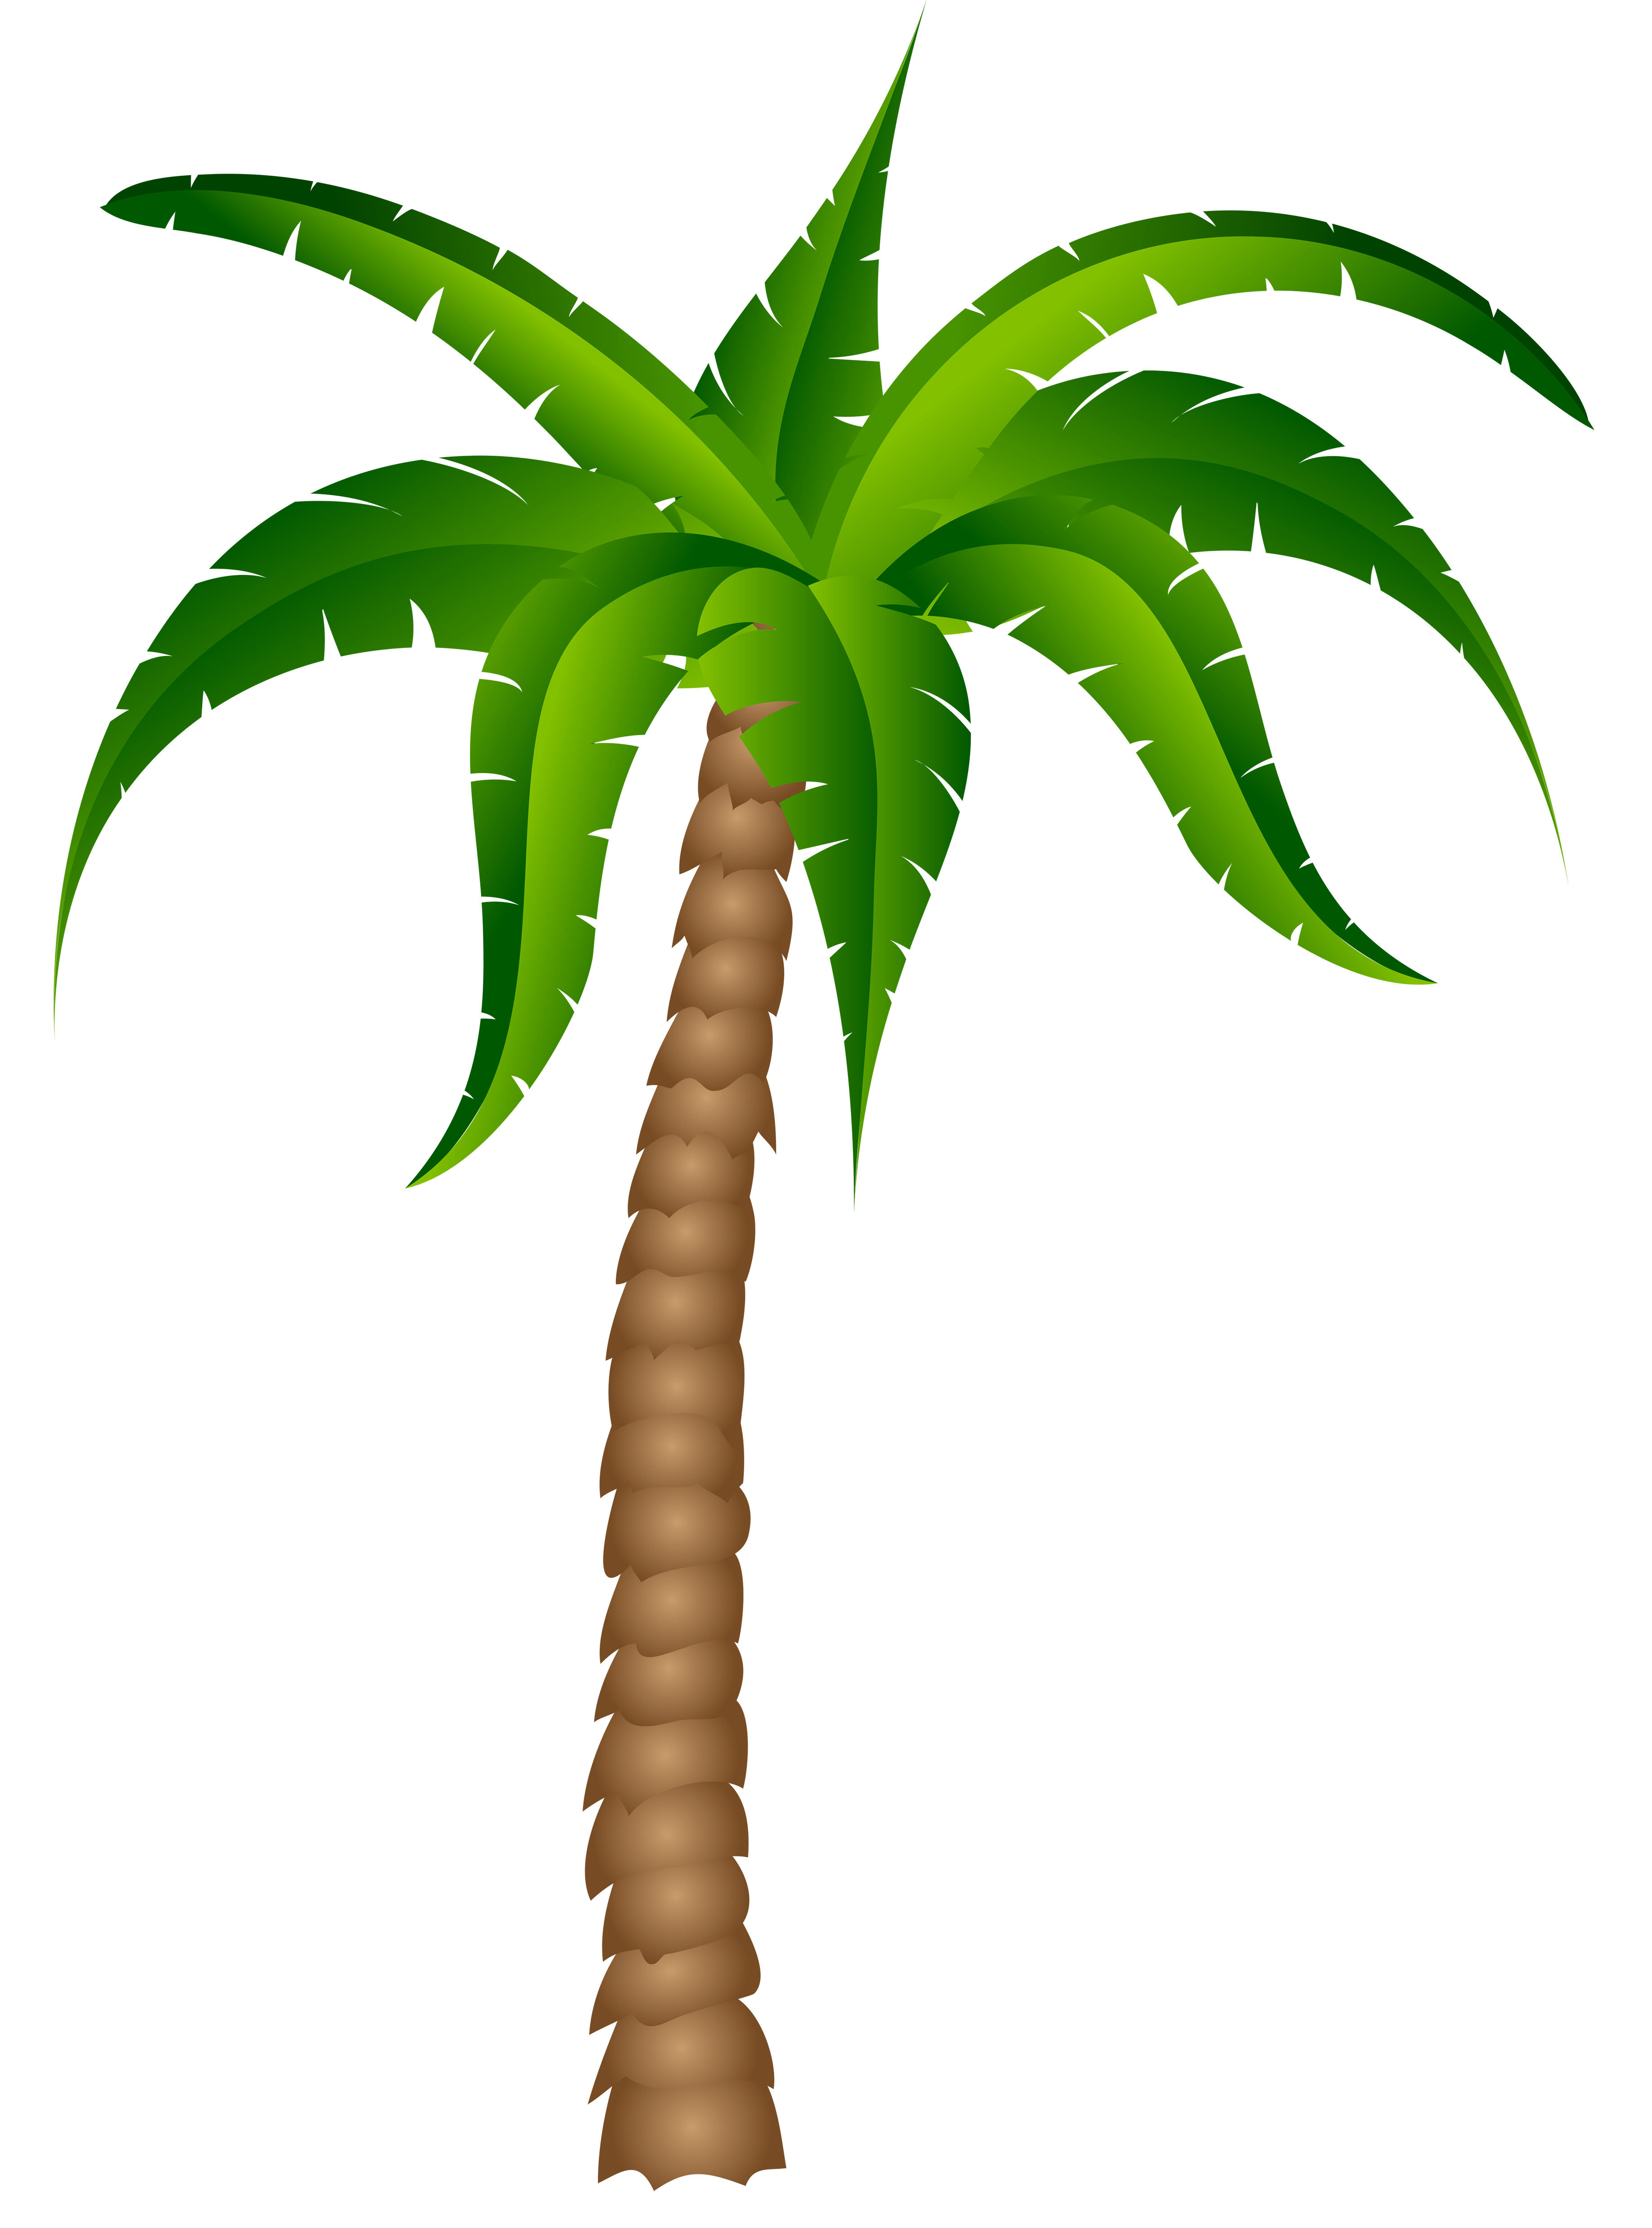 Palm Trees png download - 1630*2000 - Free Transparent Cactus And